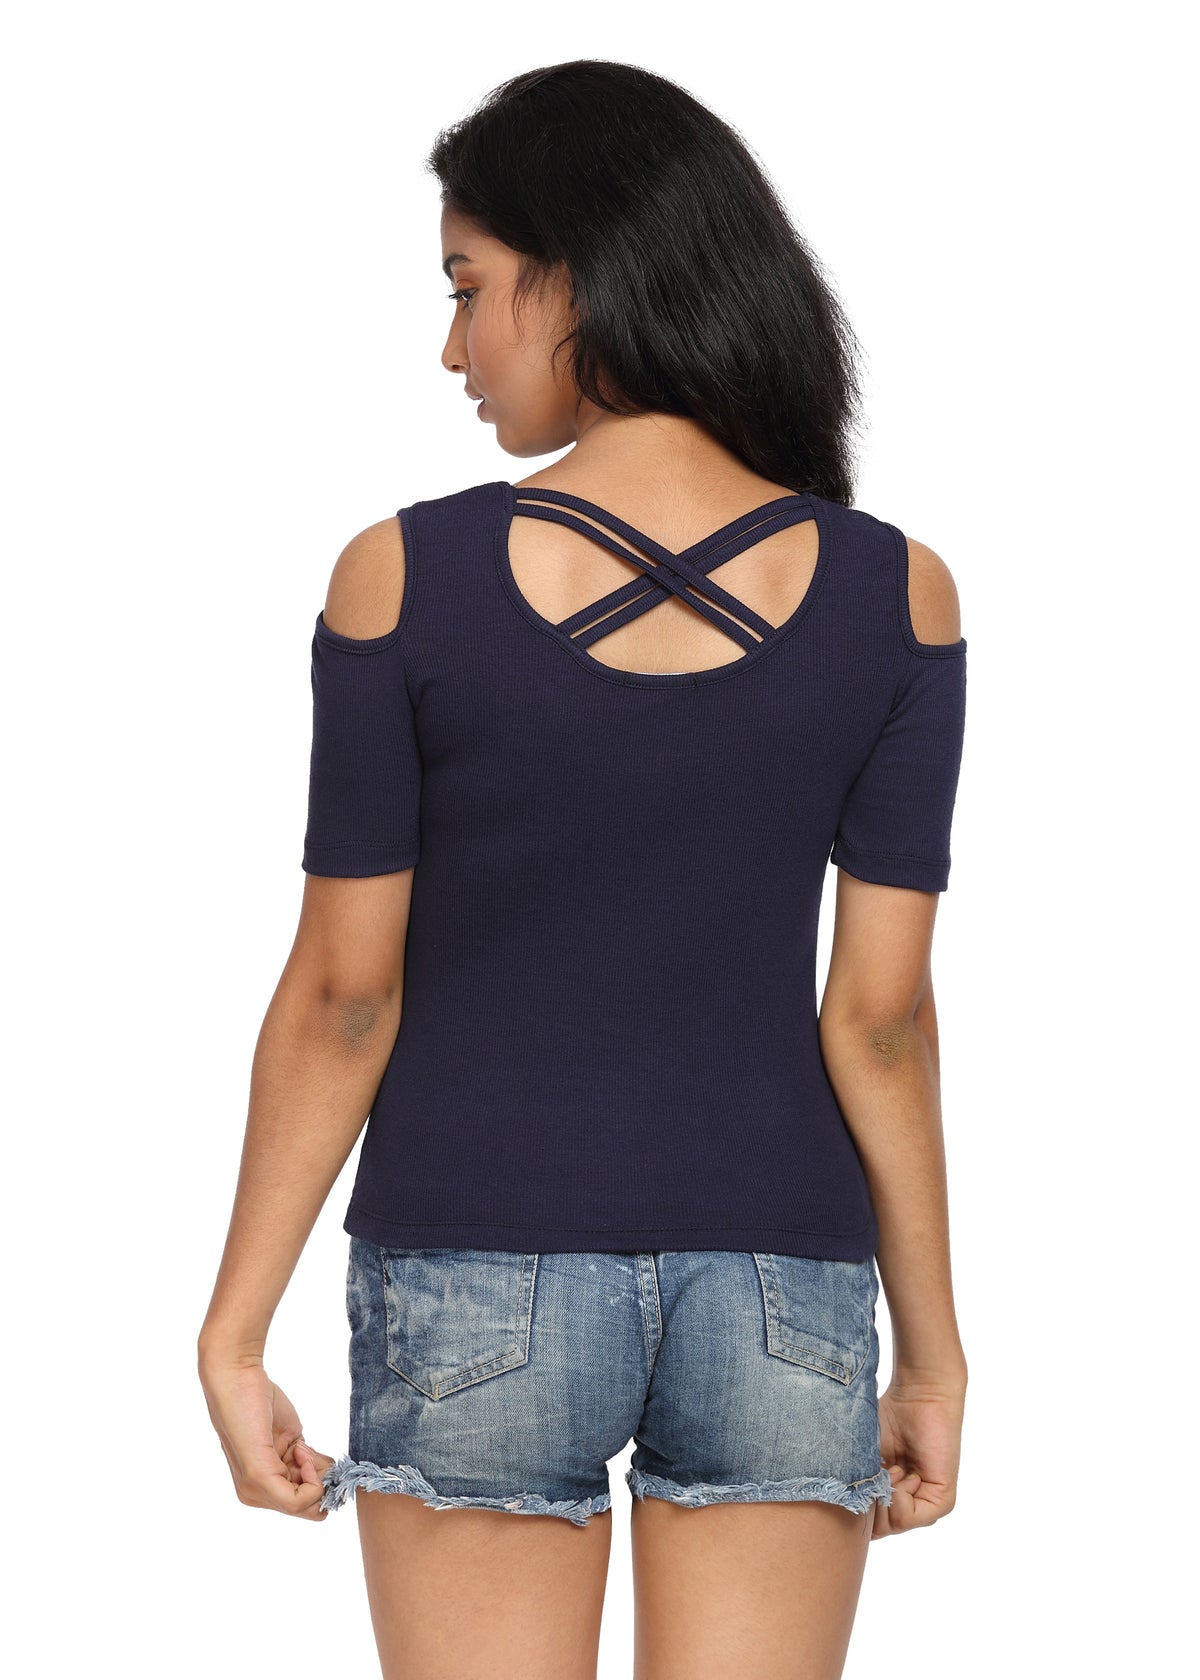 Half Sleeves Ribbed Cold Shoulder Navy Blue Top with a Cross Back - GENZEE